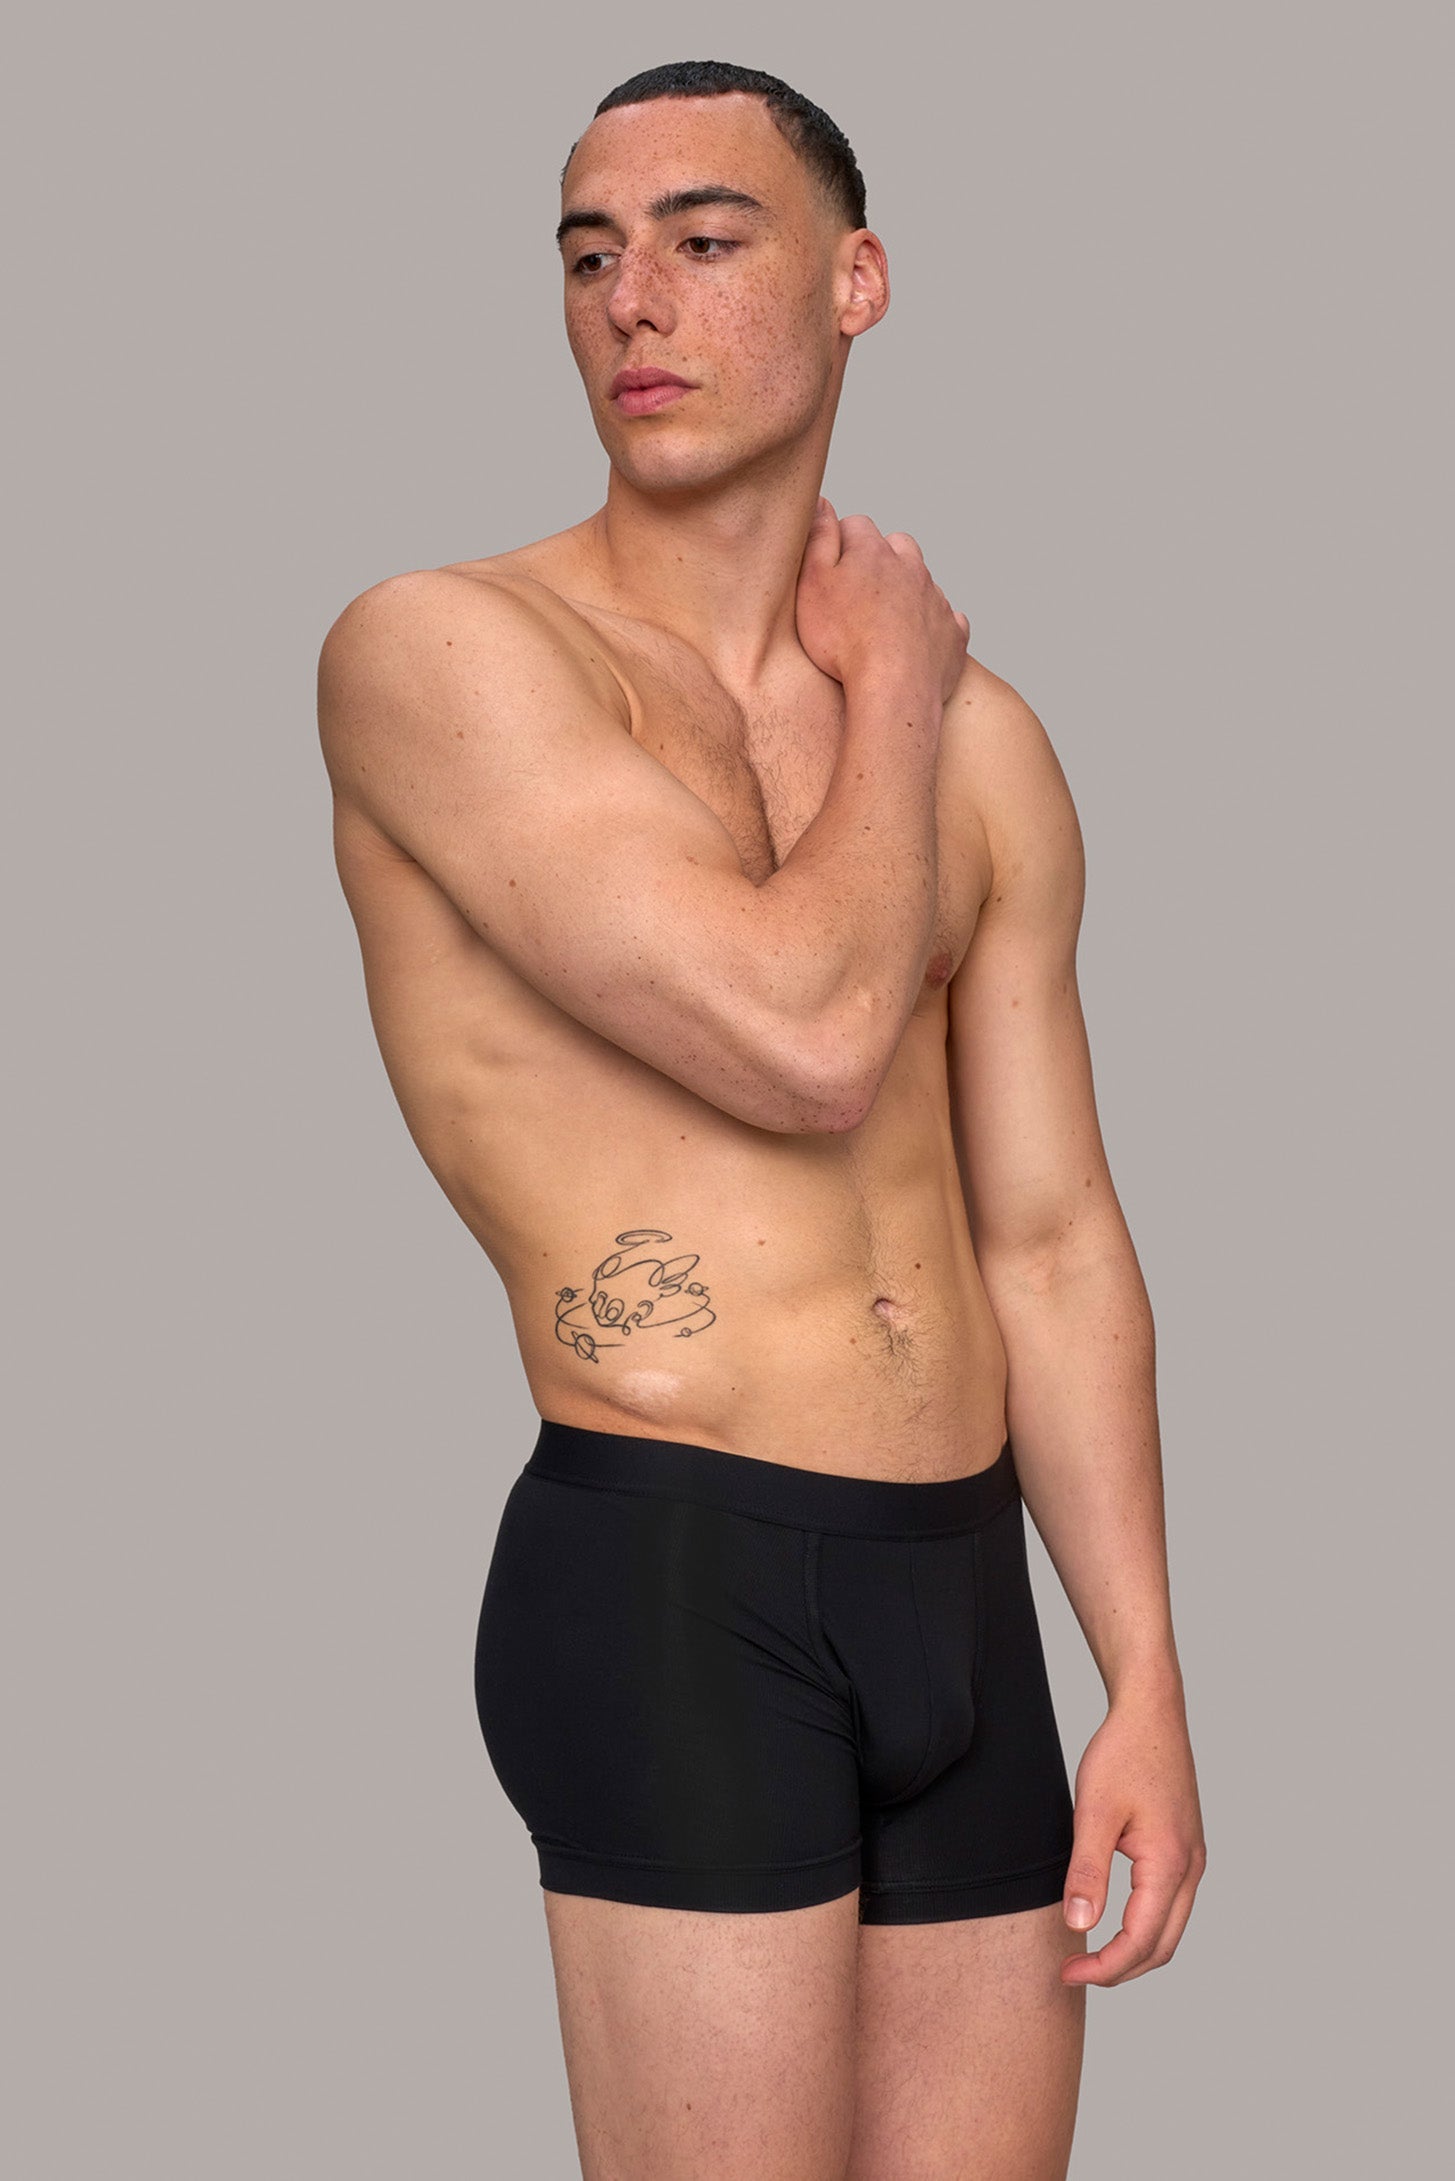 Boxer briefs / underpants with a new waistband in black made from natural MicroModal from moi-basics